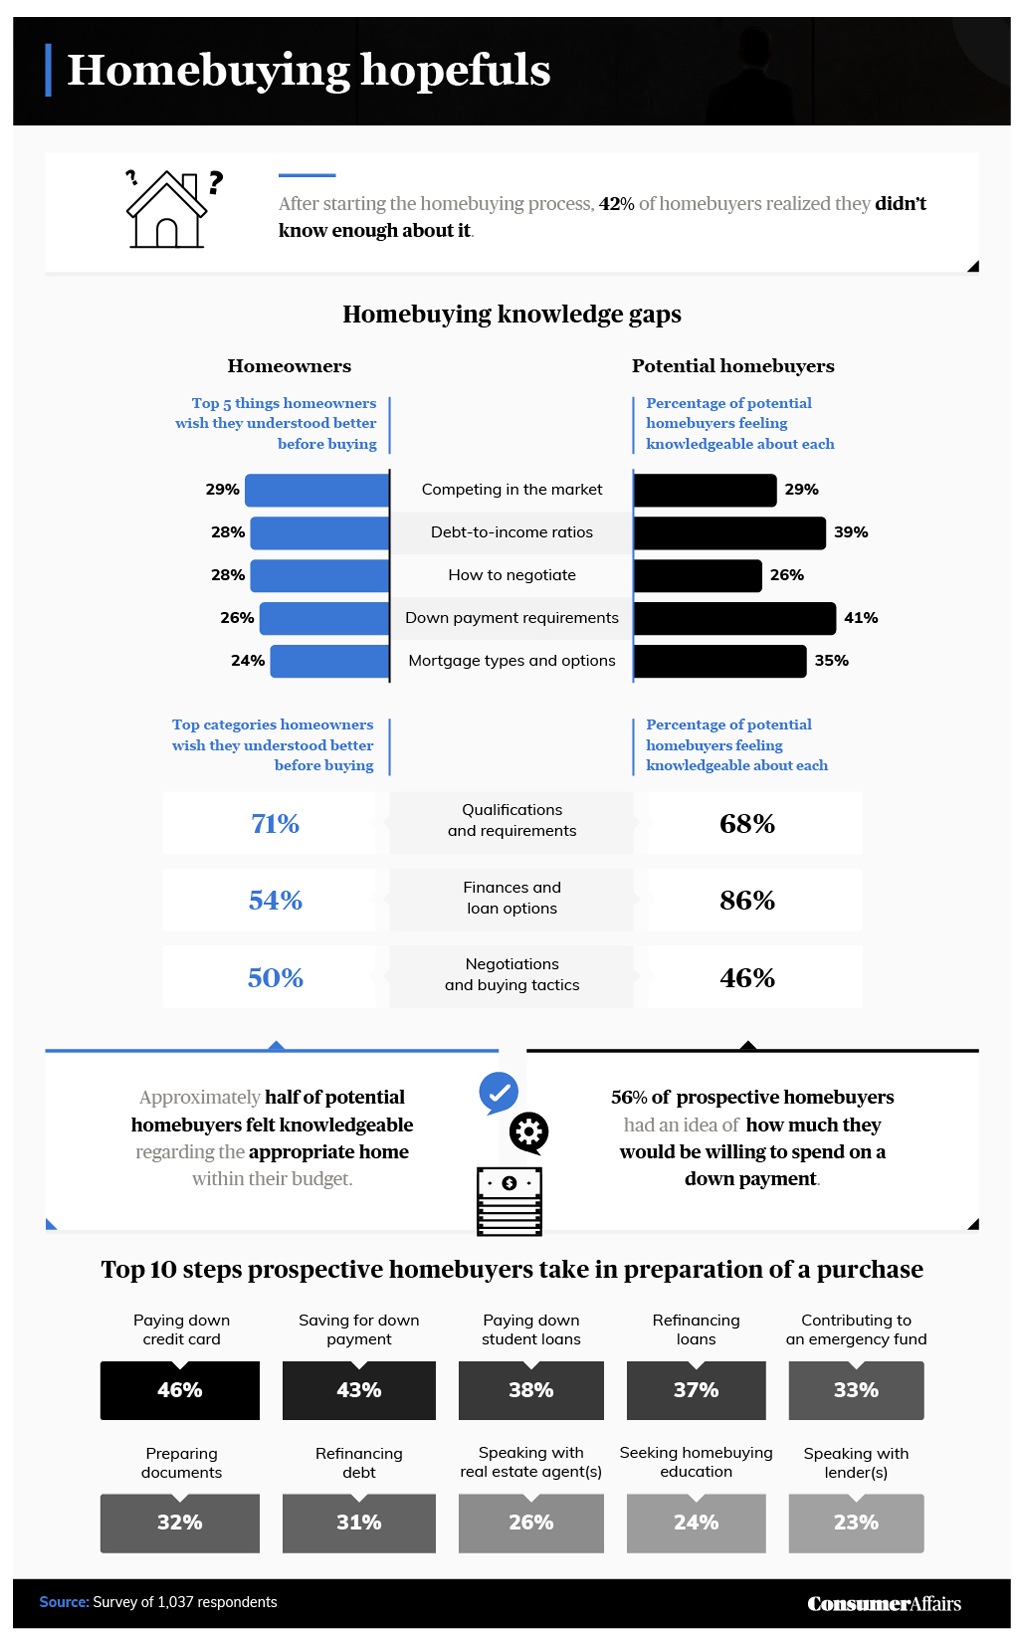 A graphic of multiple bar charts and figures showing buyers' financial priorities and what they wish they knew about homebuying.